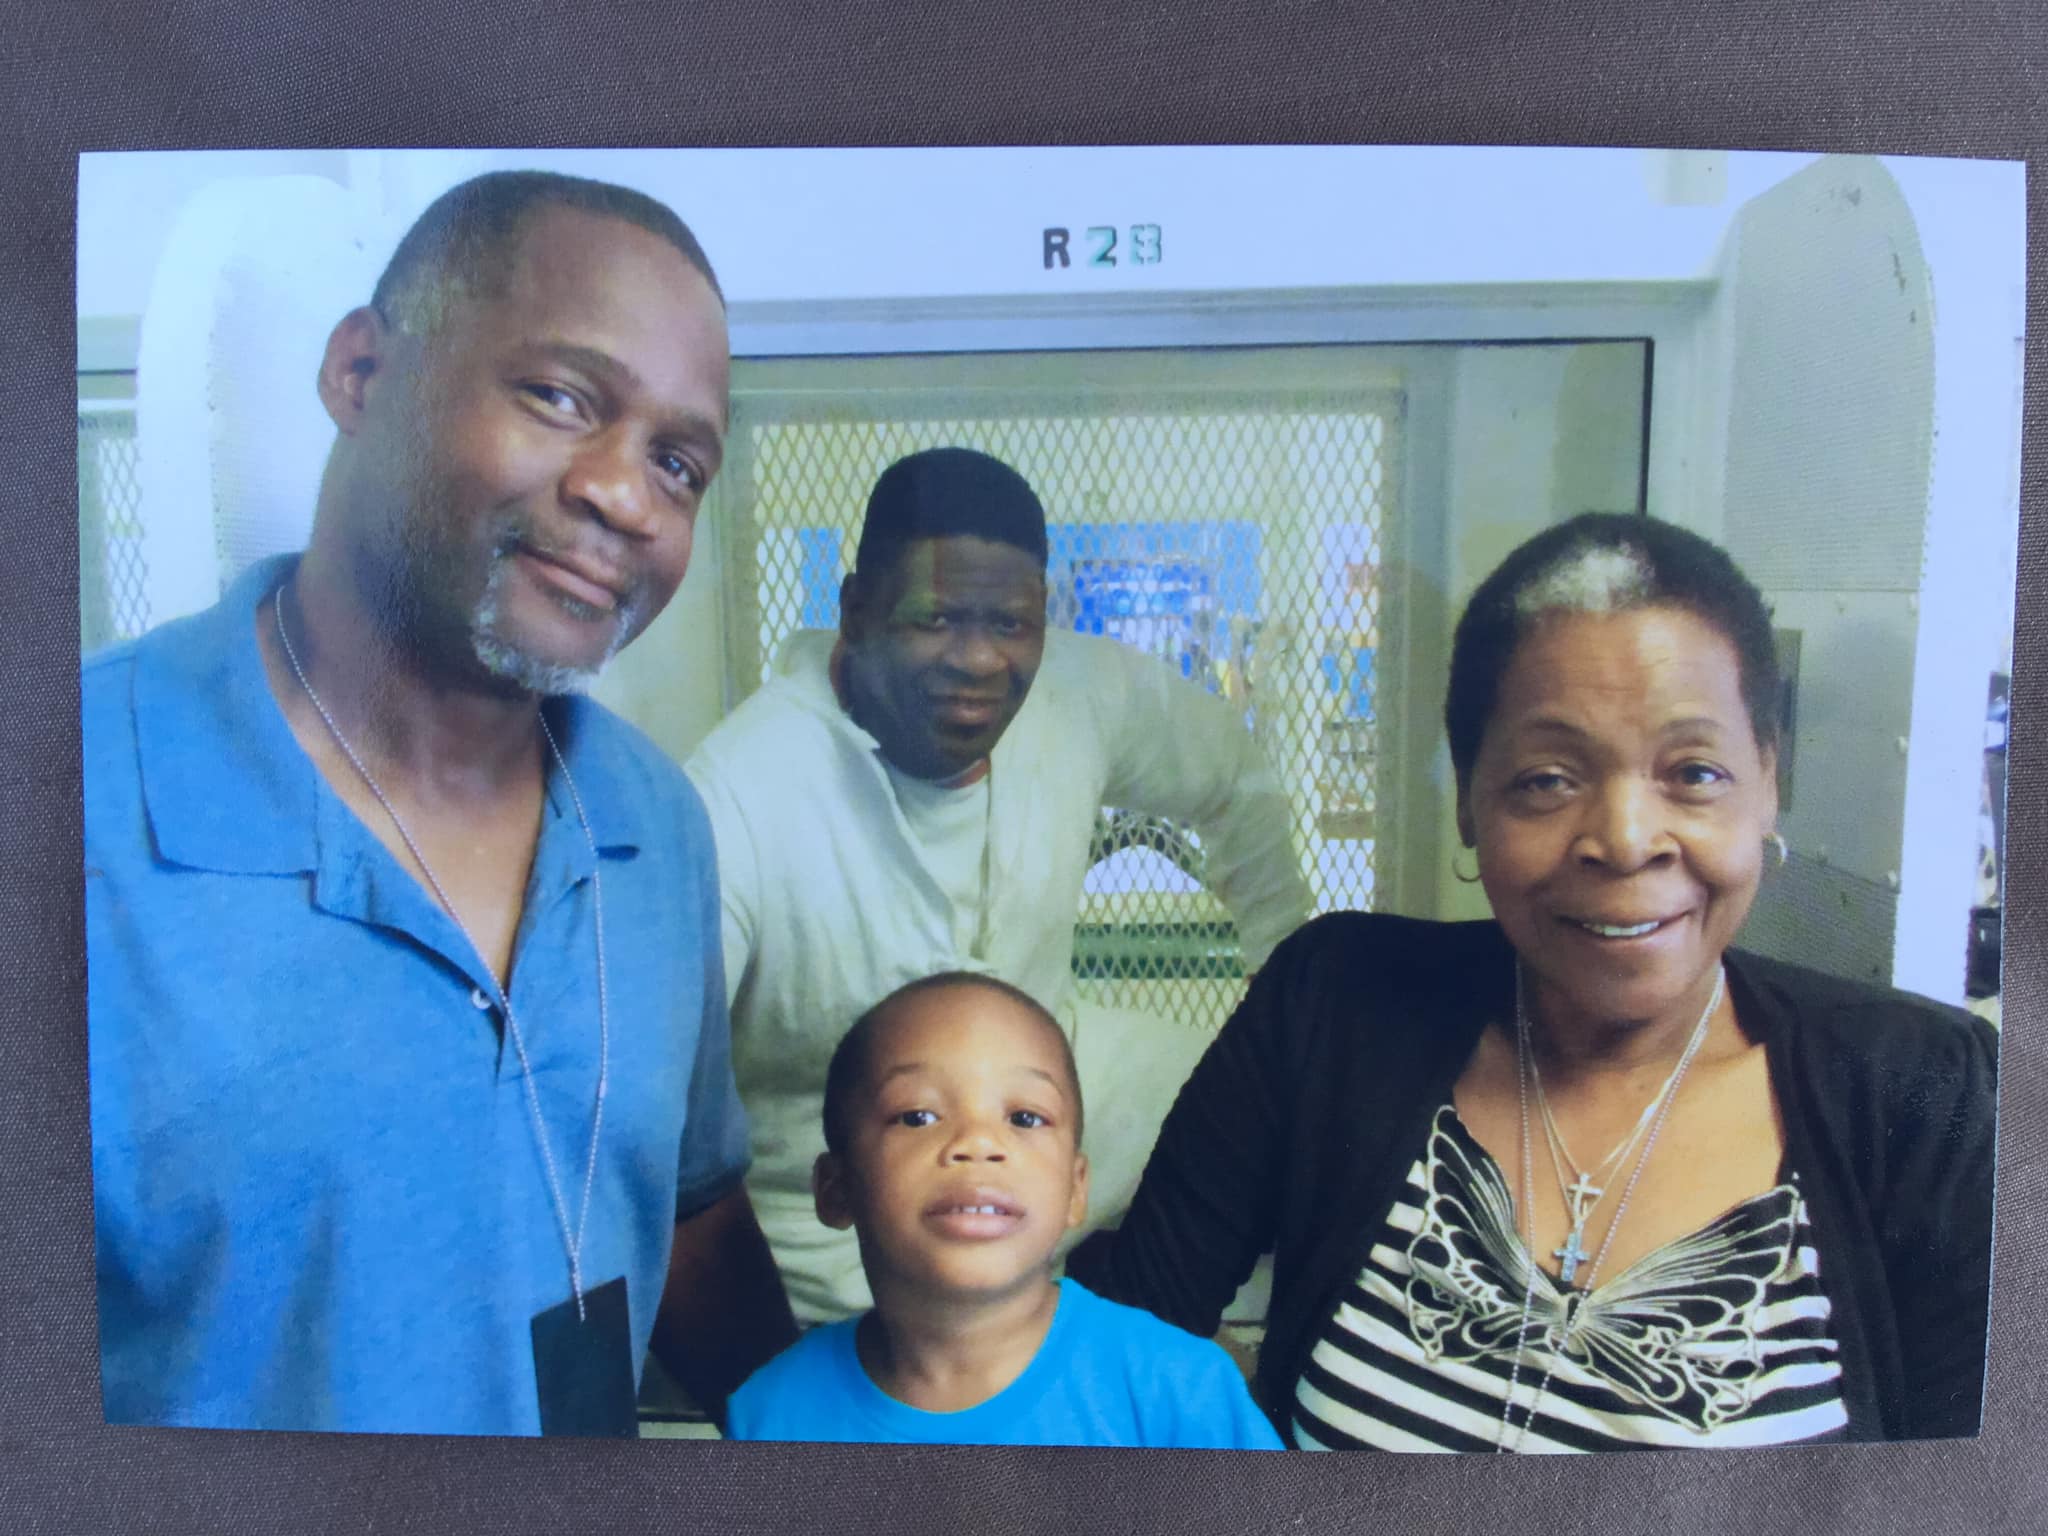 Rodney Reed with his brother Rodrick, nephew Rodrick Jr., and mother Sandra Reed at the Allan B. Polunsky Unit, West Livingston, Texas in 2019. (Image: Courtesy of the Reed Justice Initiative)